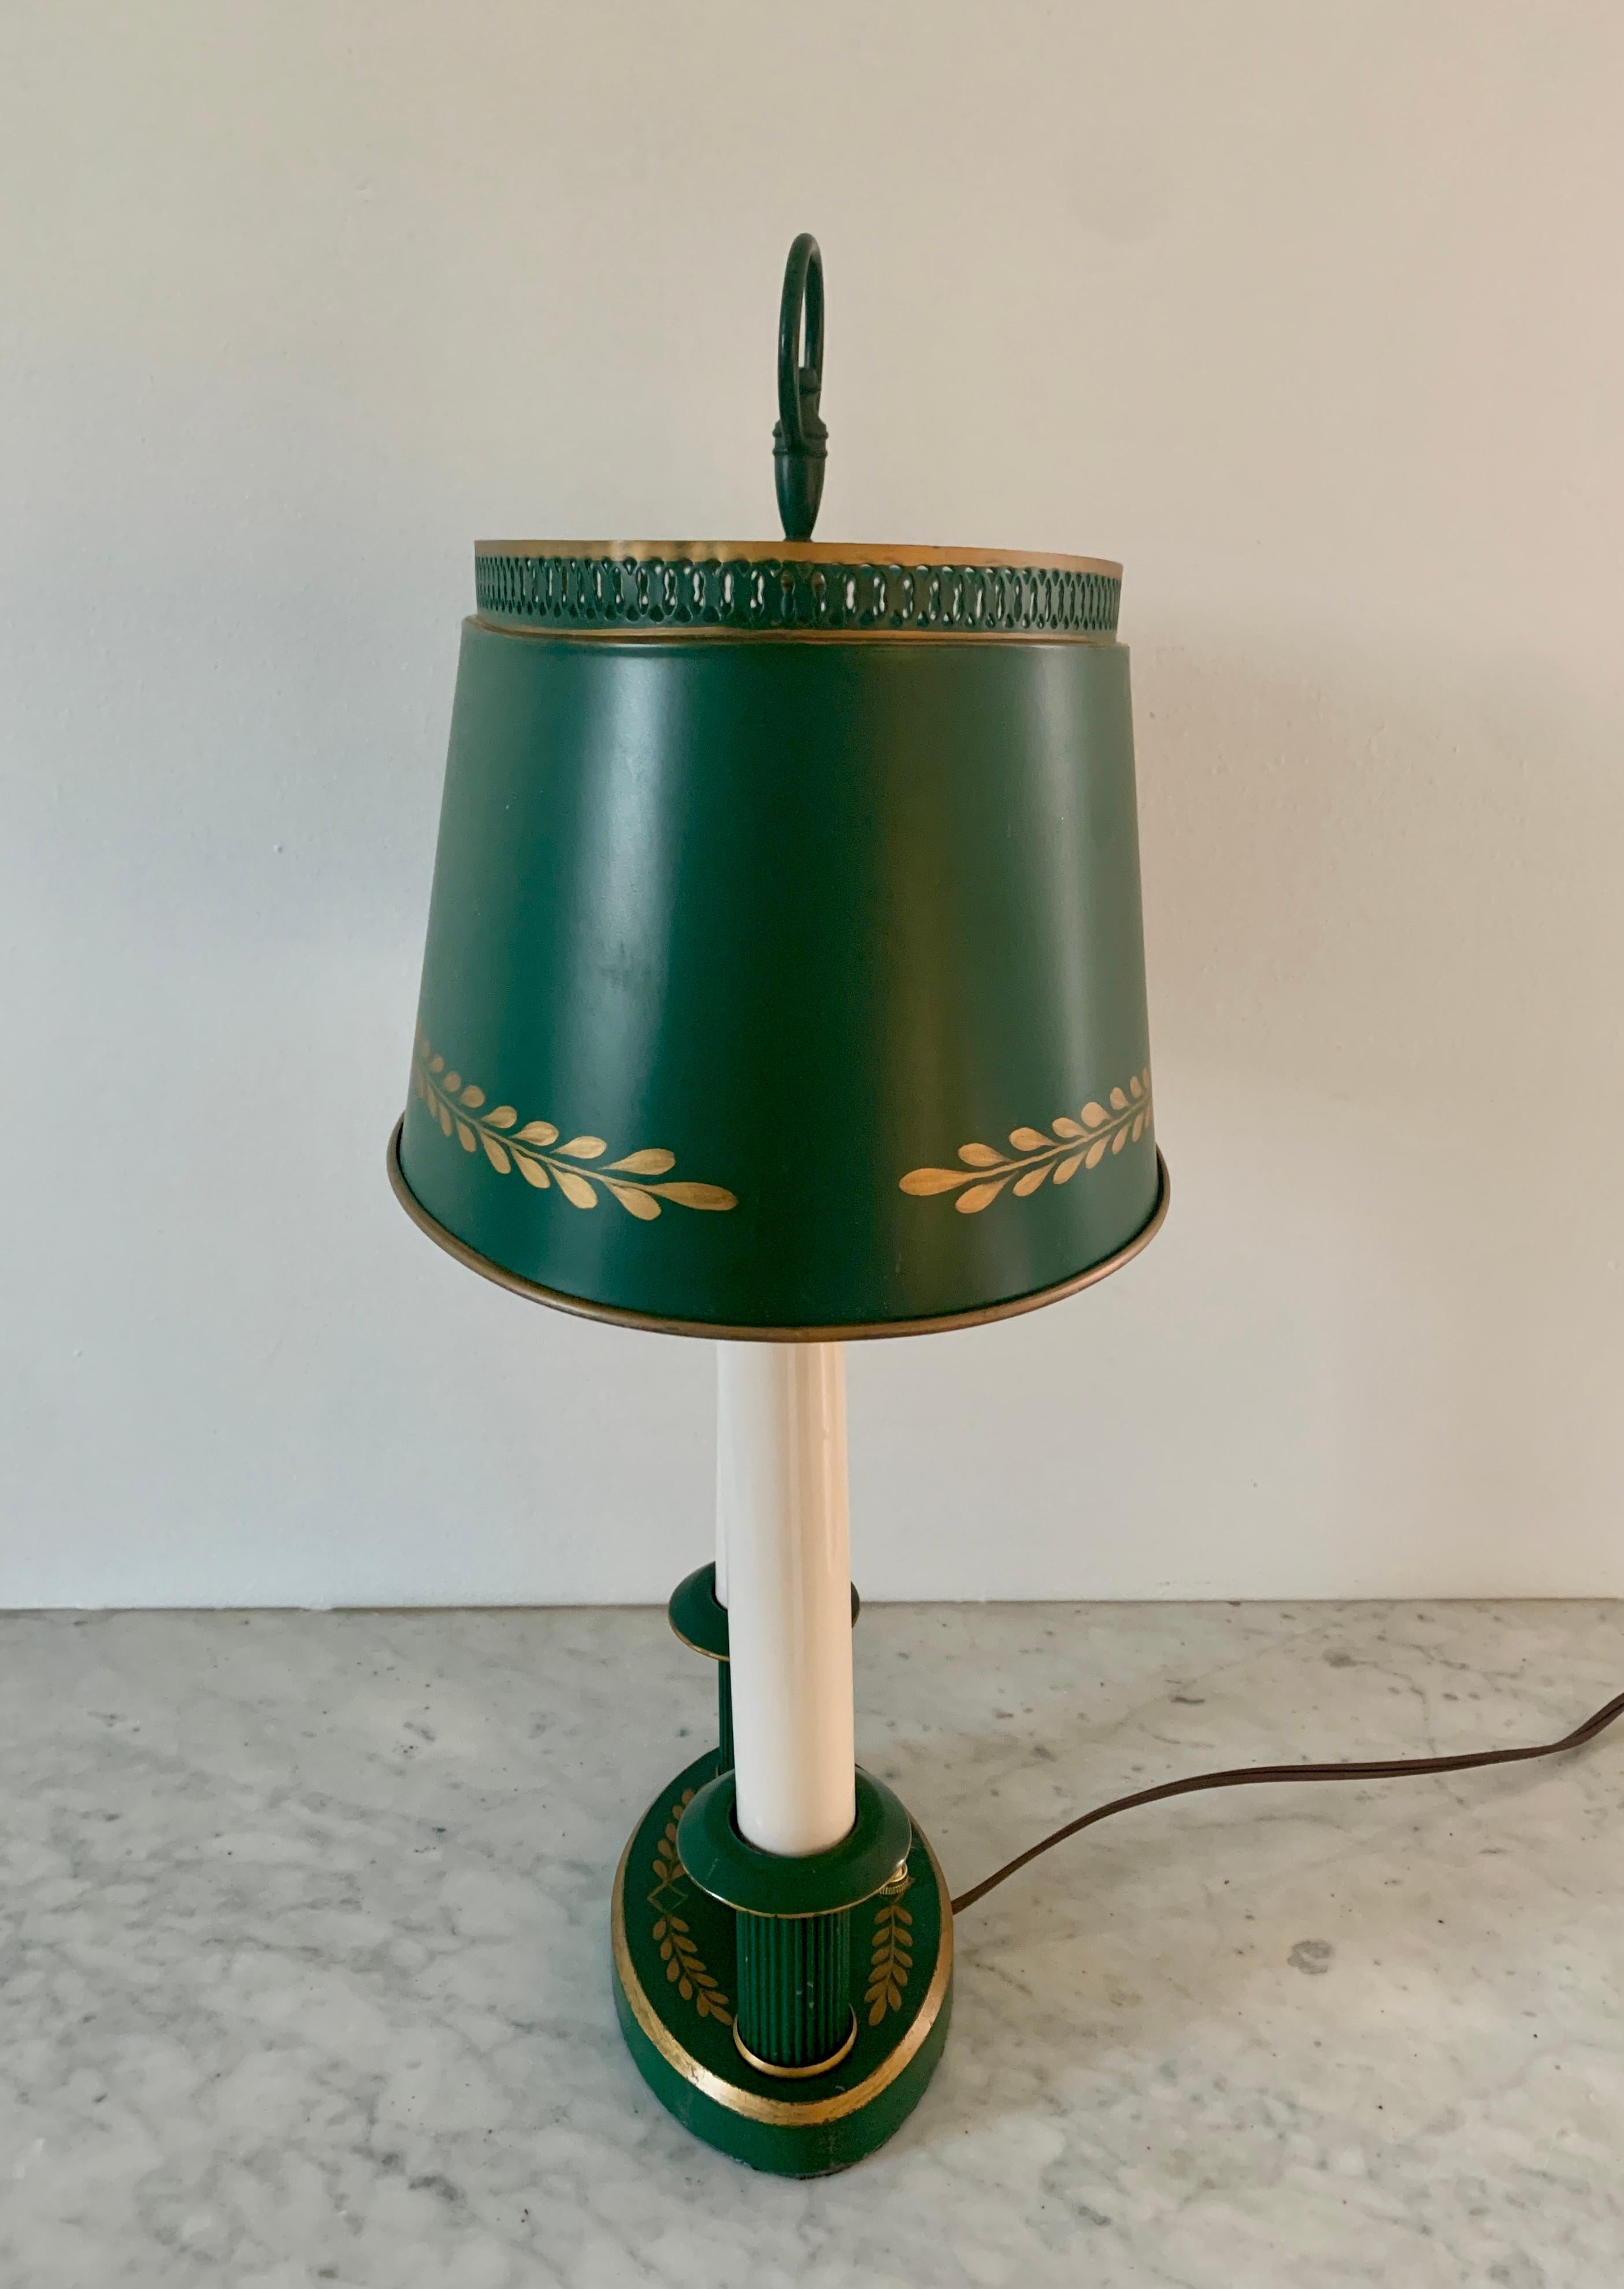 Metal Mid-20th Century French Regency Green and Gold Tole Bouillotte Lamp For Sale